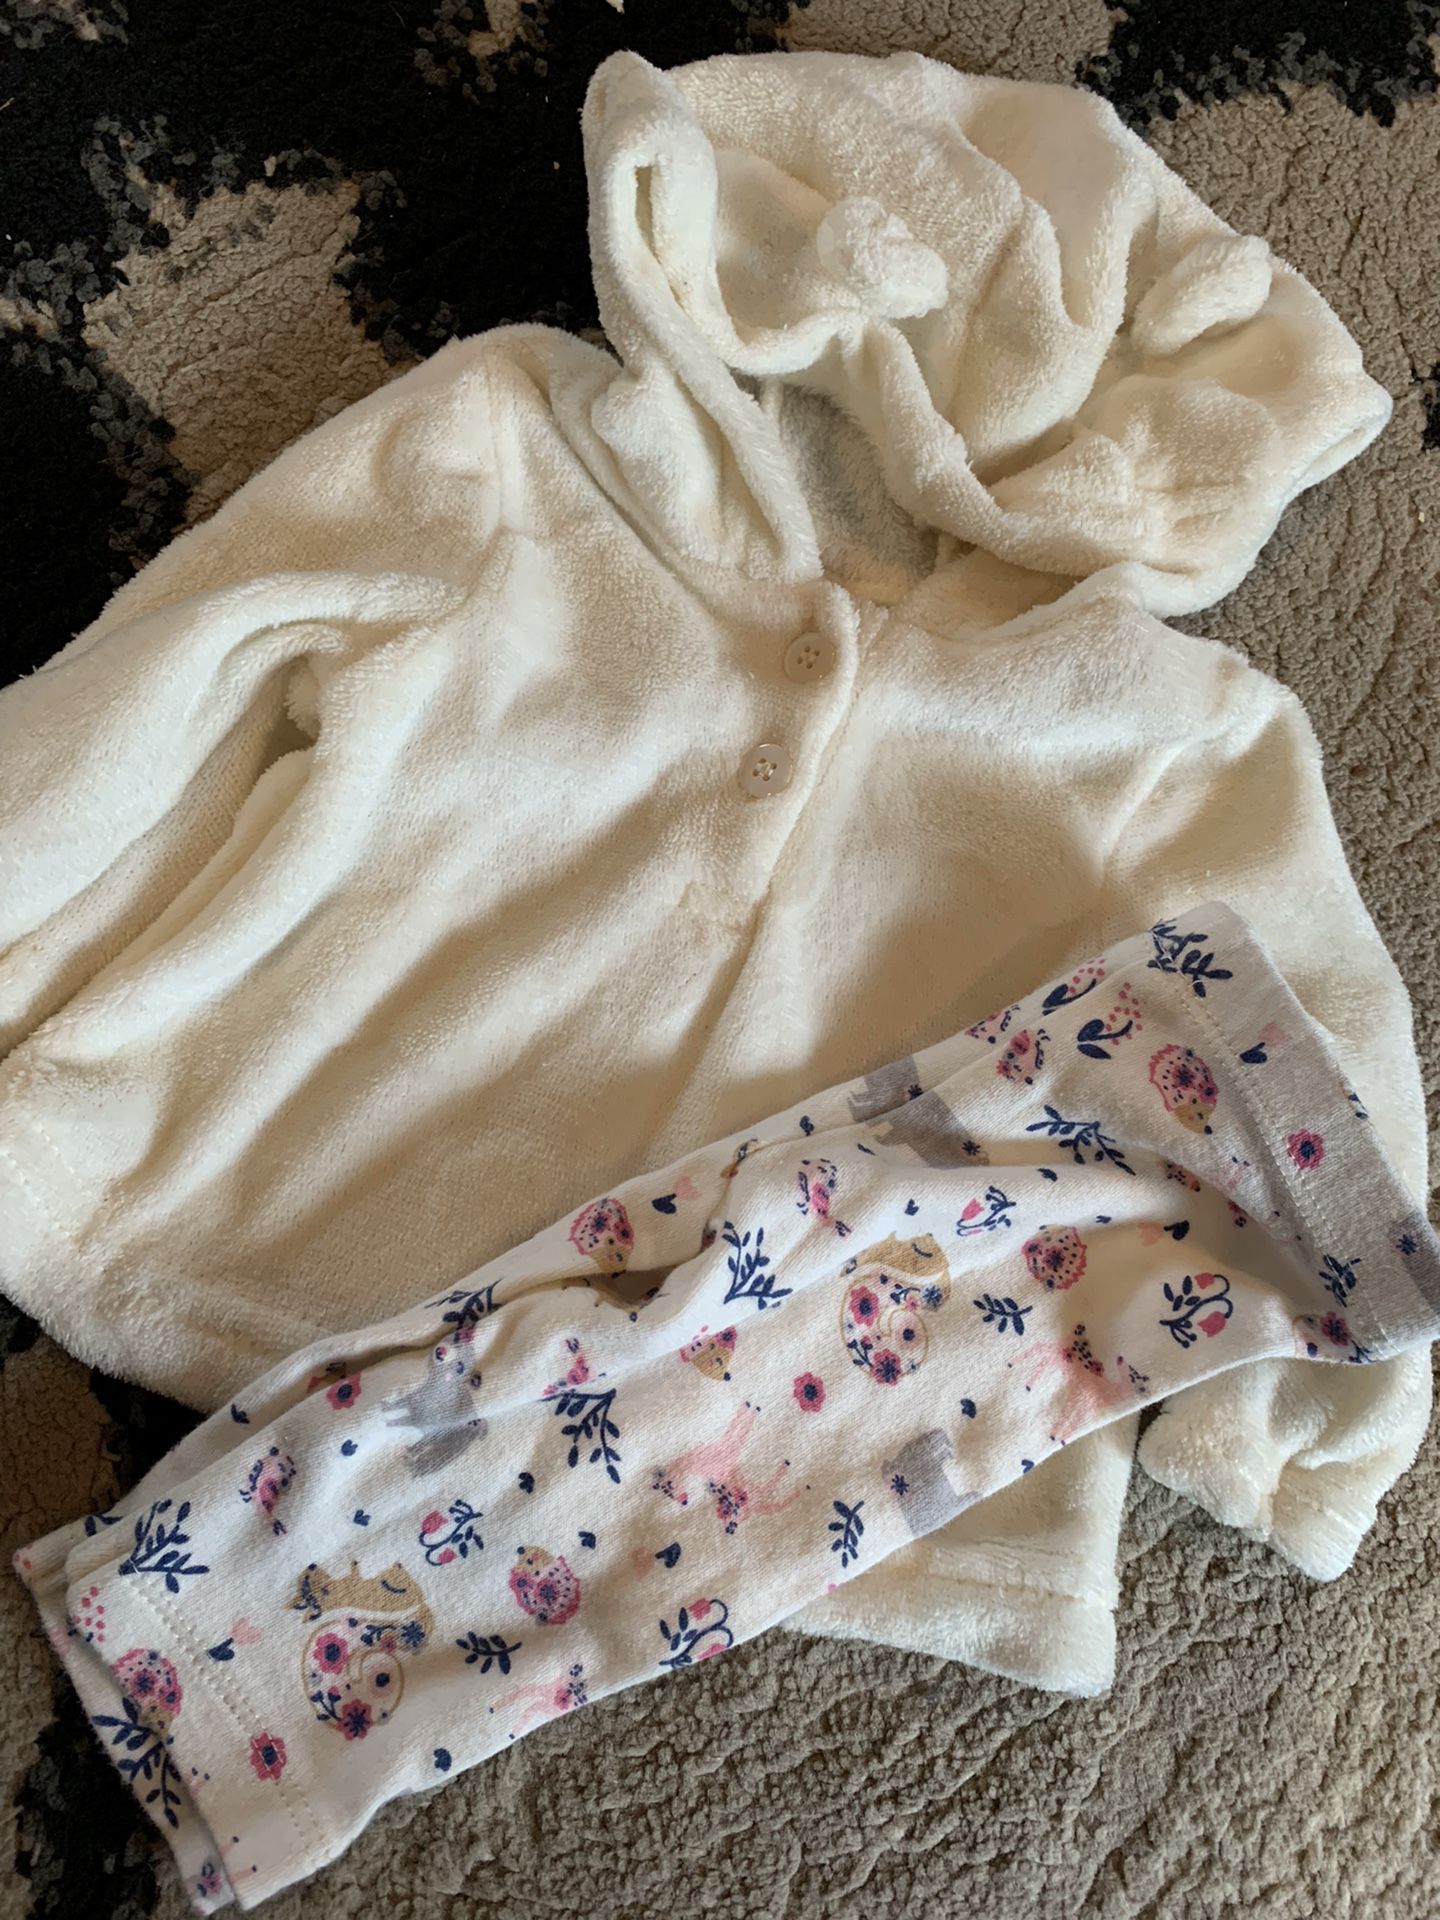 NWOT Carter’s 3 month cozy one piece grey & pink outfit  Never worn washed once  Super soft and cute  Smoke/ Pet free home  Pick up lynnwood or shippe